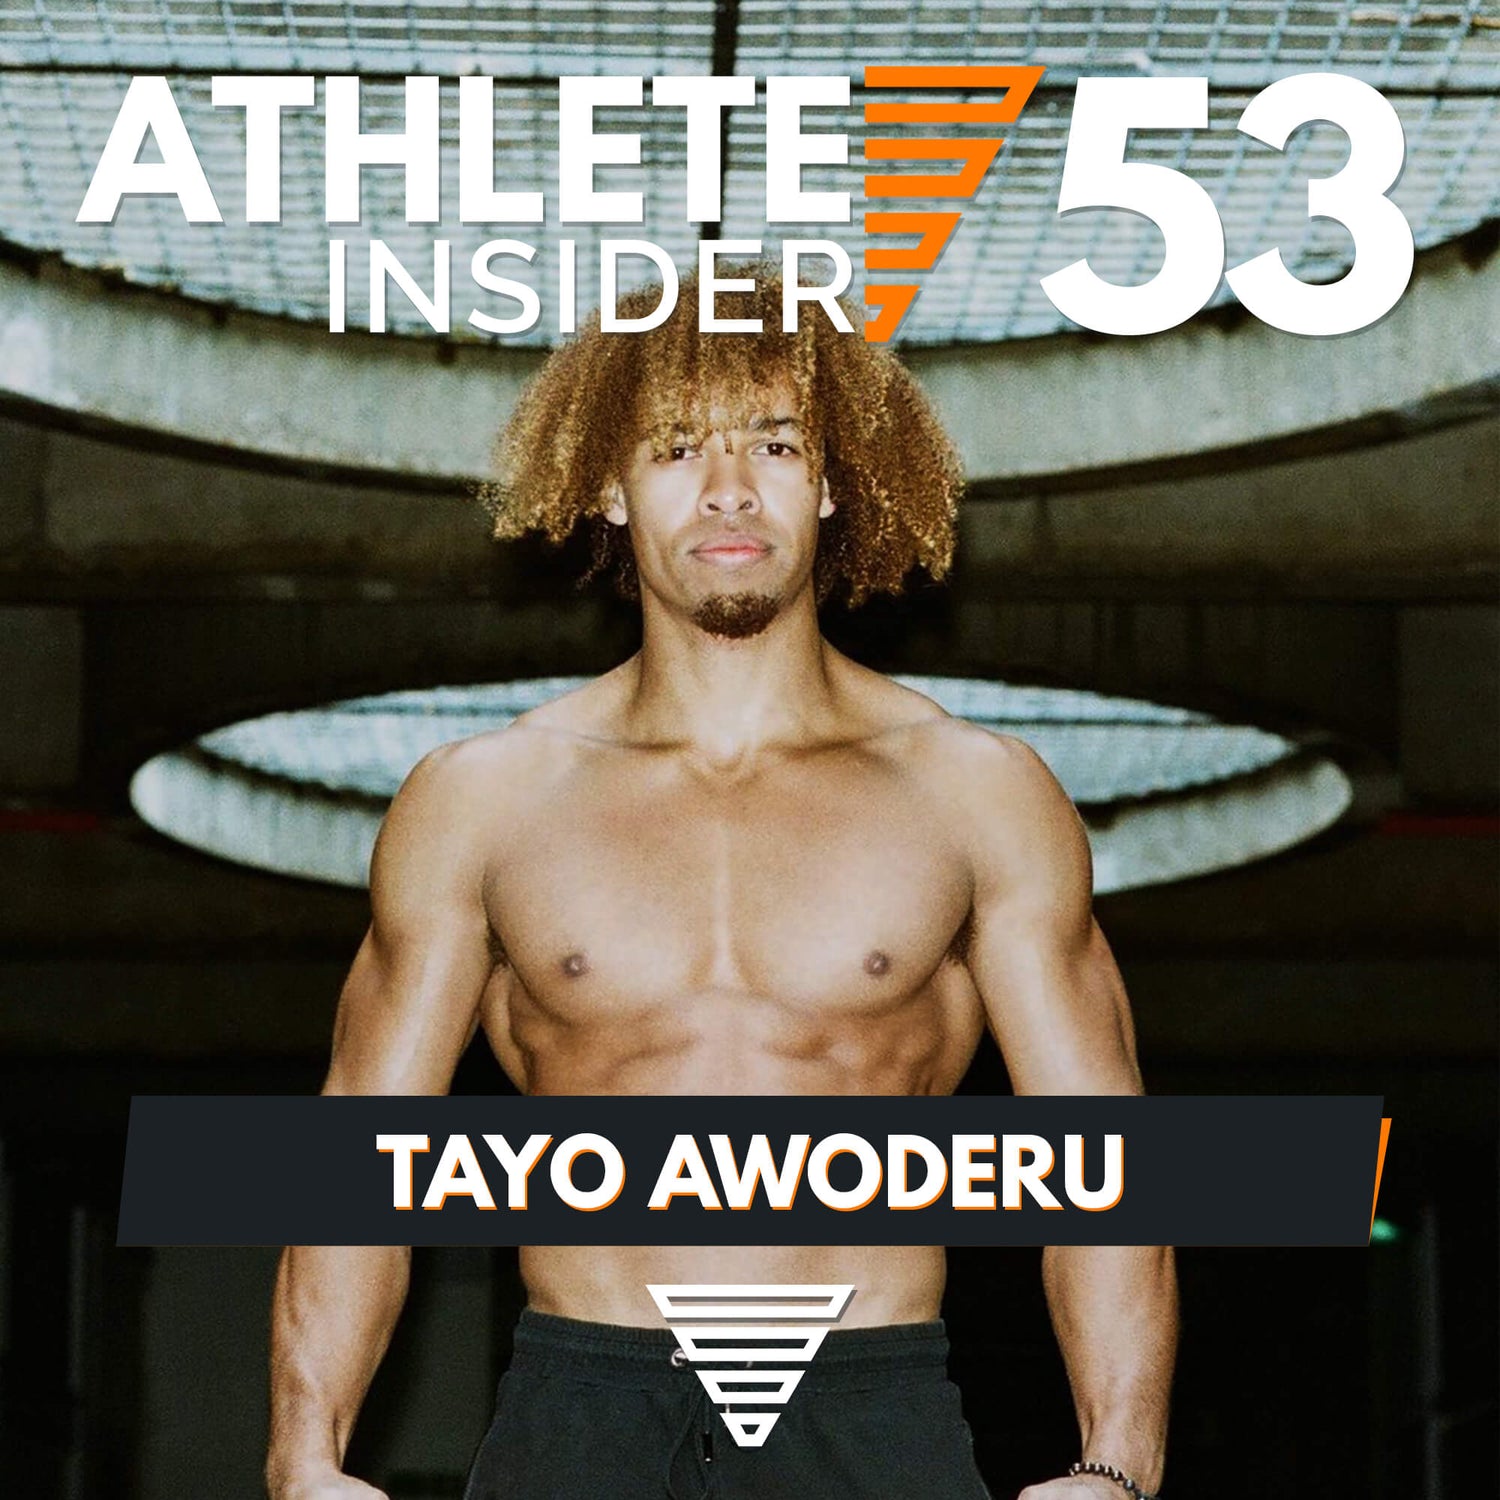 TAYO "ABNORMAL BEINGS" | Workout & Nutrition | Interview | The Athlete Insider Podcast #53